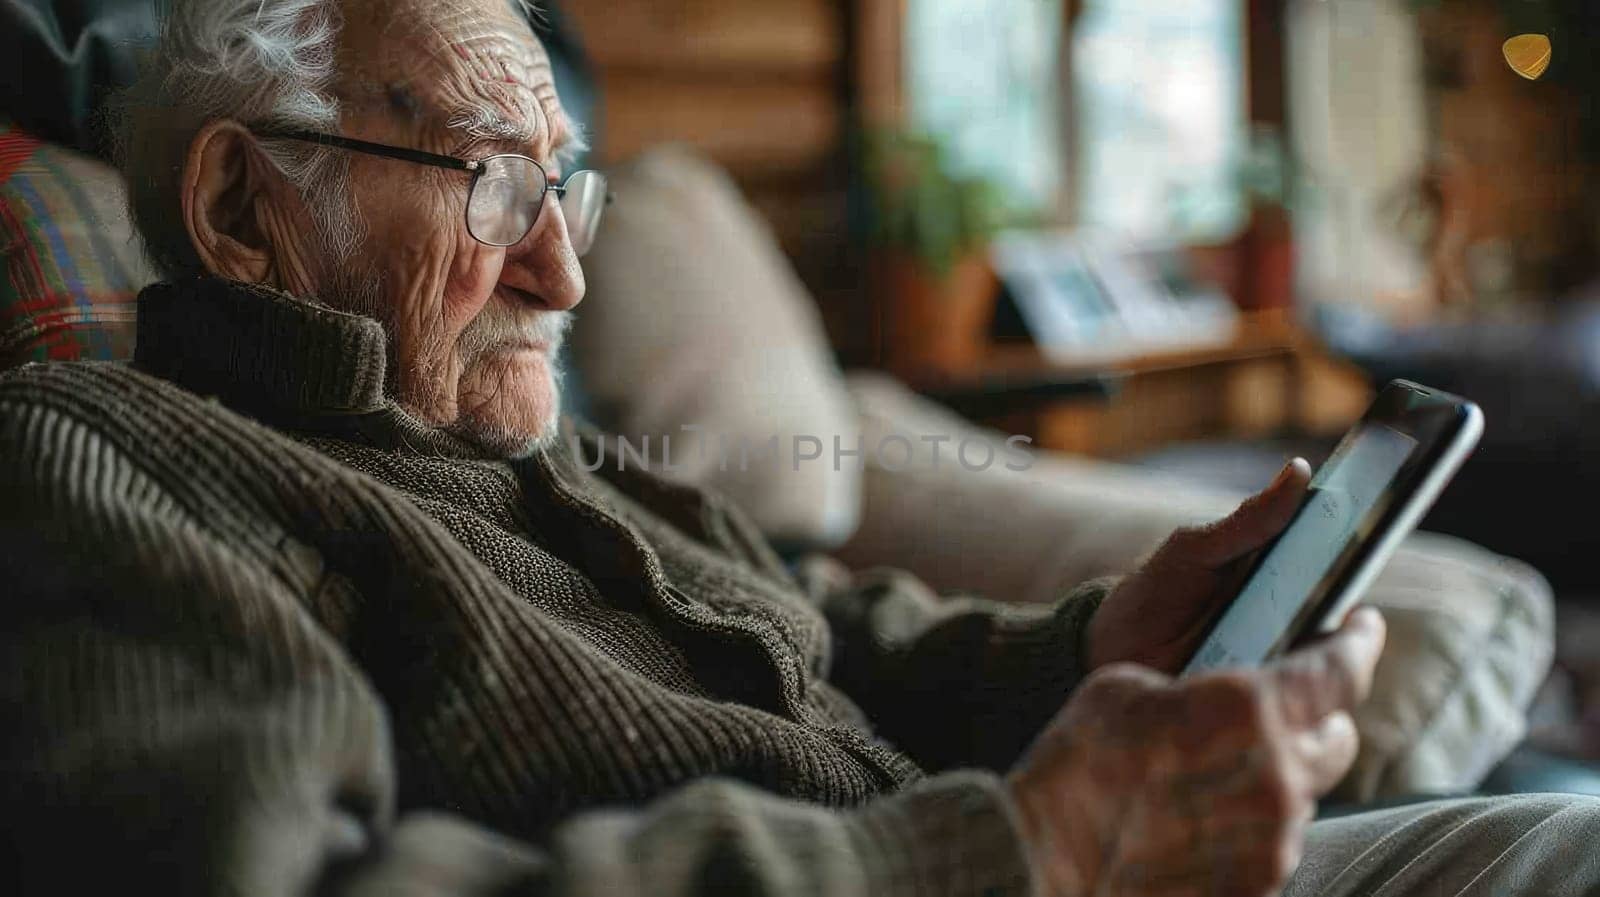 An elderly person in a wheelchair using a tablet device, with a caregiver assisting, highlighting the integration of technology in improving daily life.